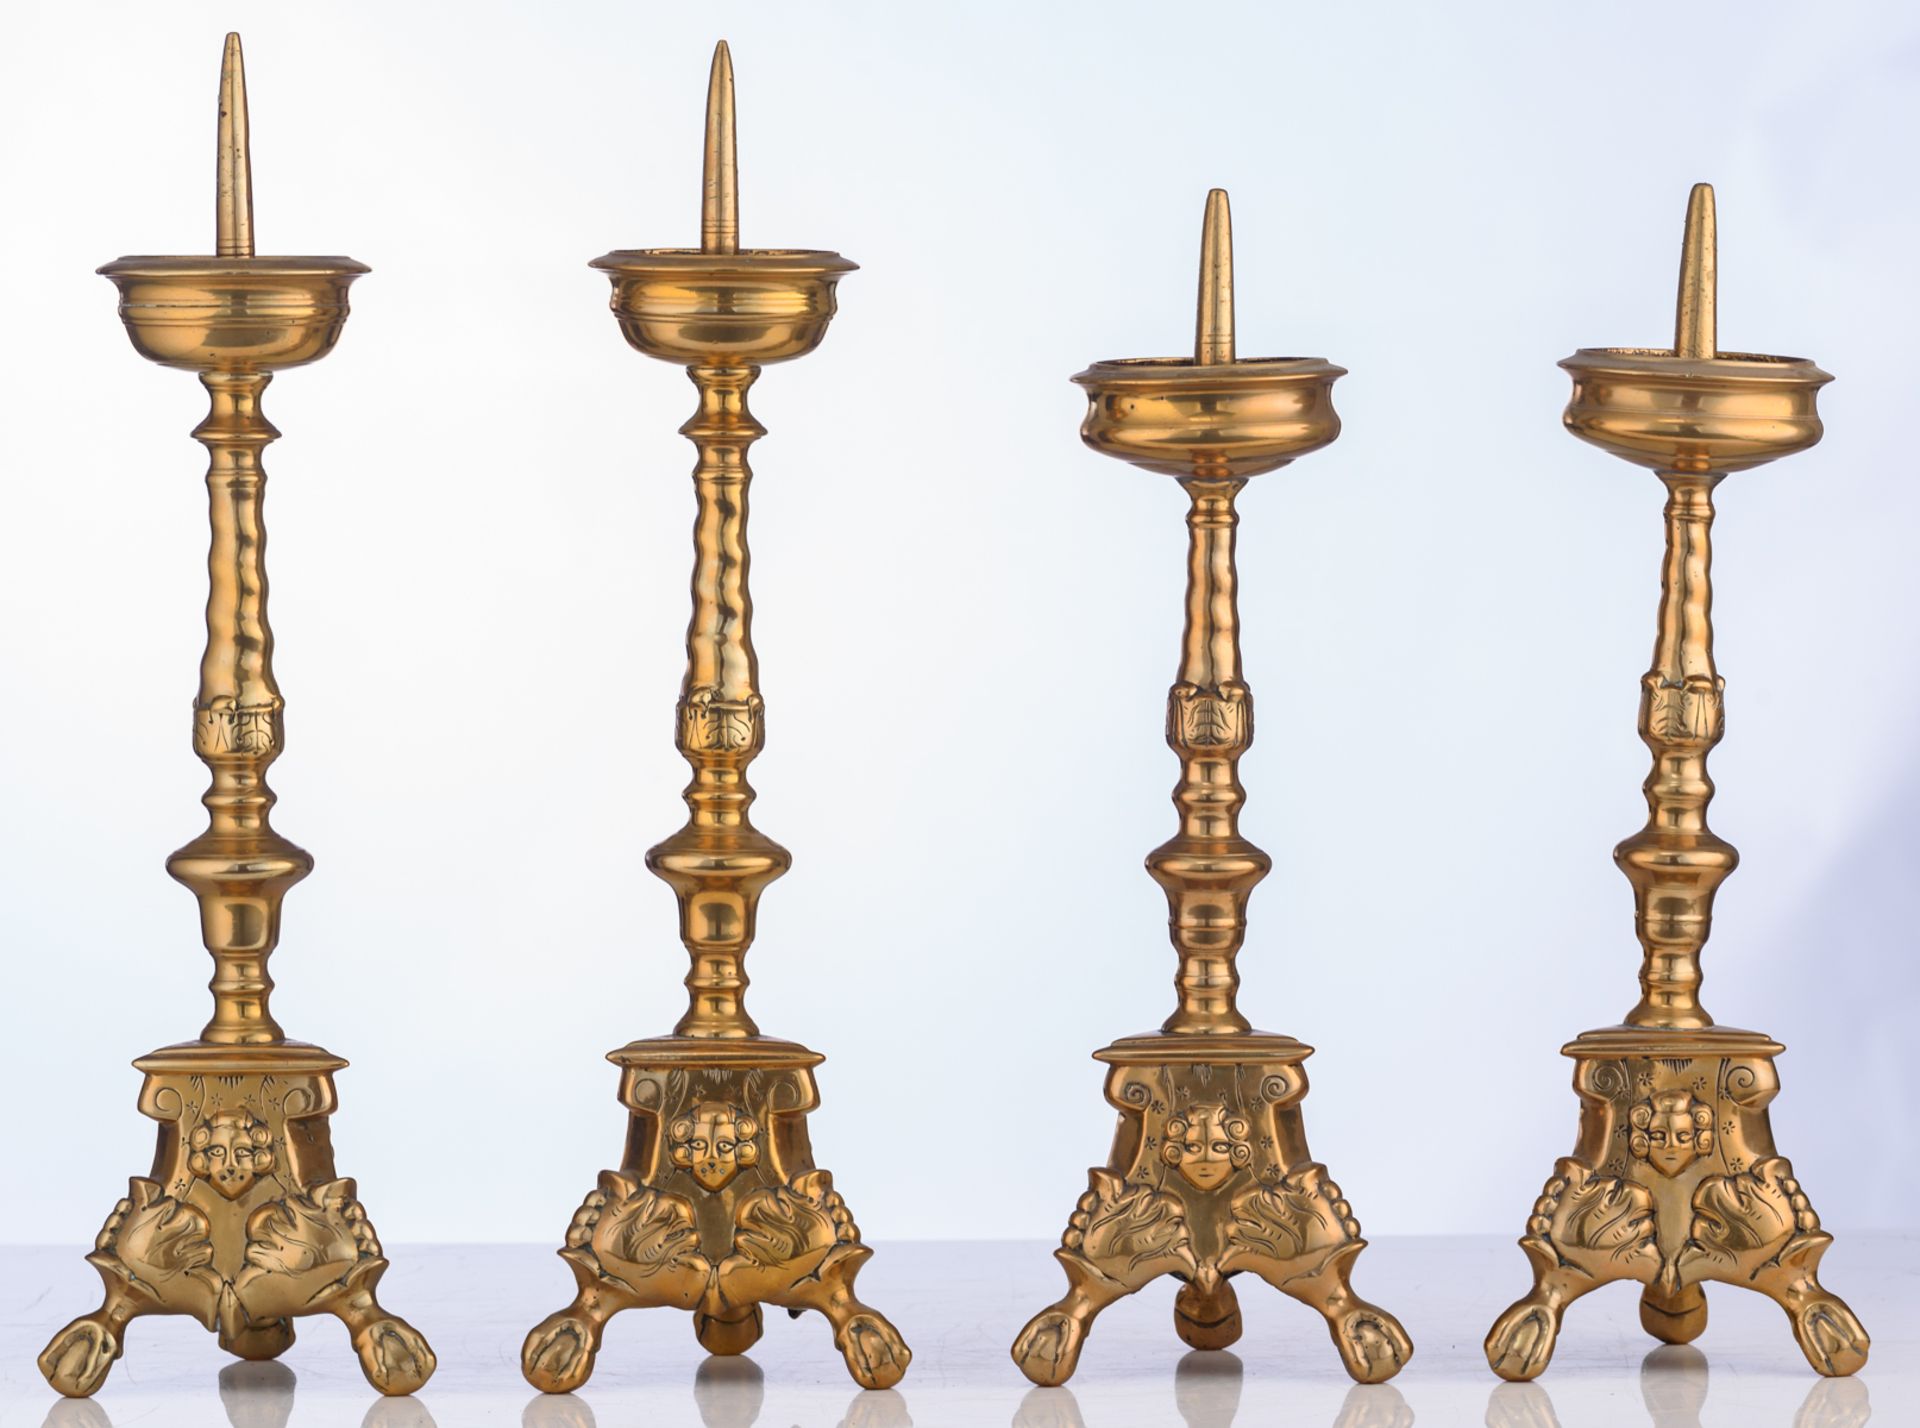 Two pair of Baroque bronze church candlesticks, 17thC, H 38,5 - 43 cm - Image 5 of 7